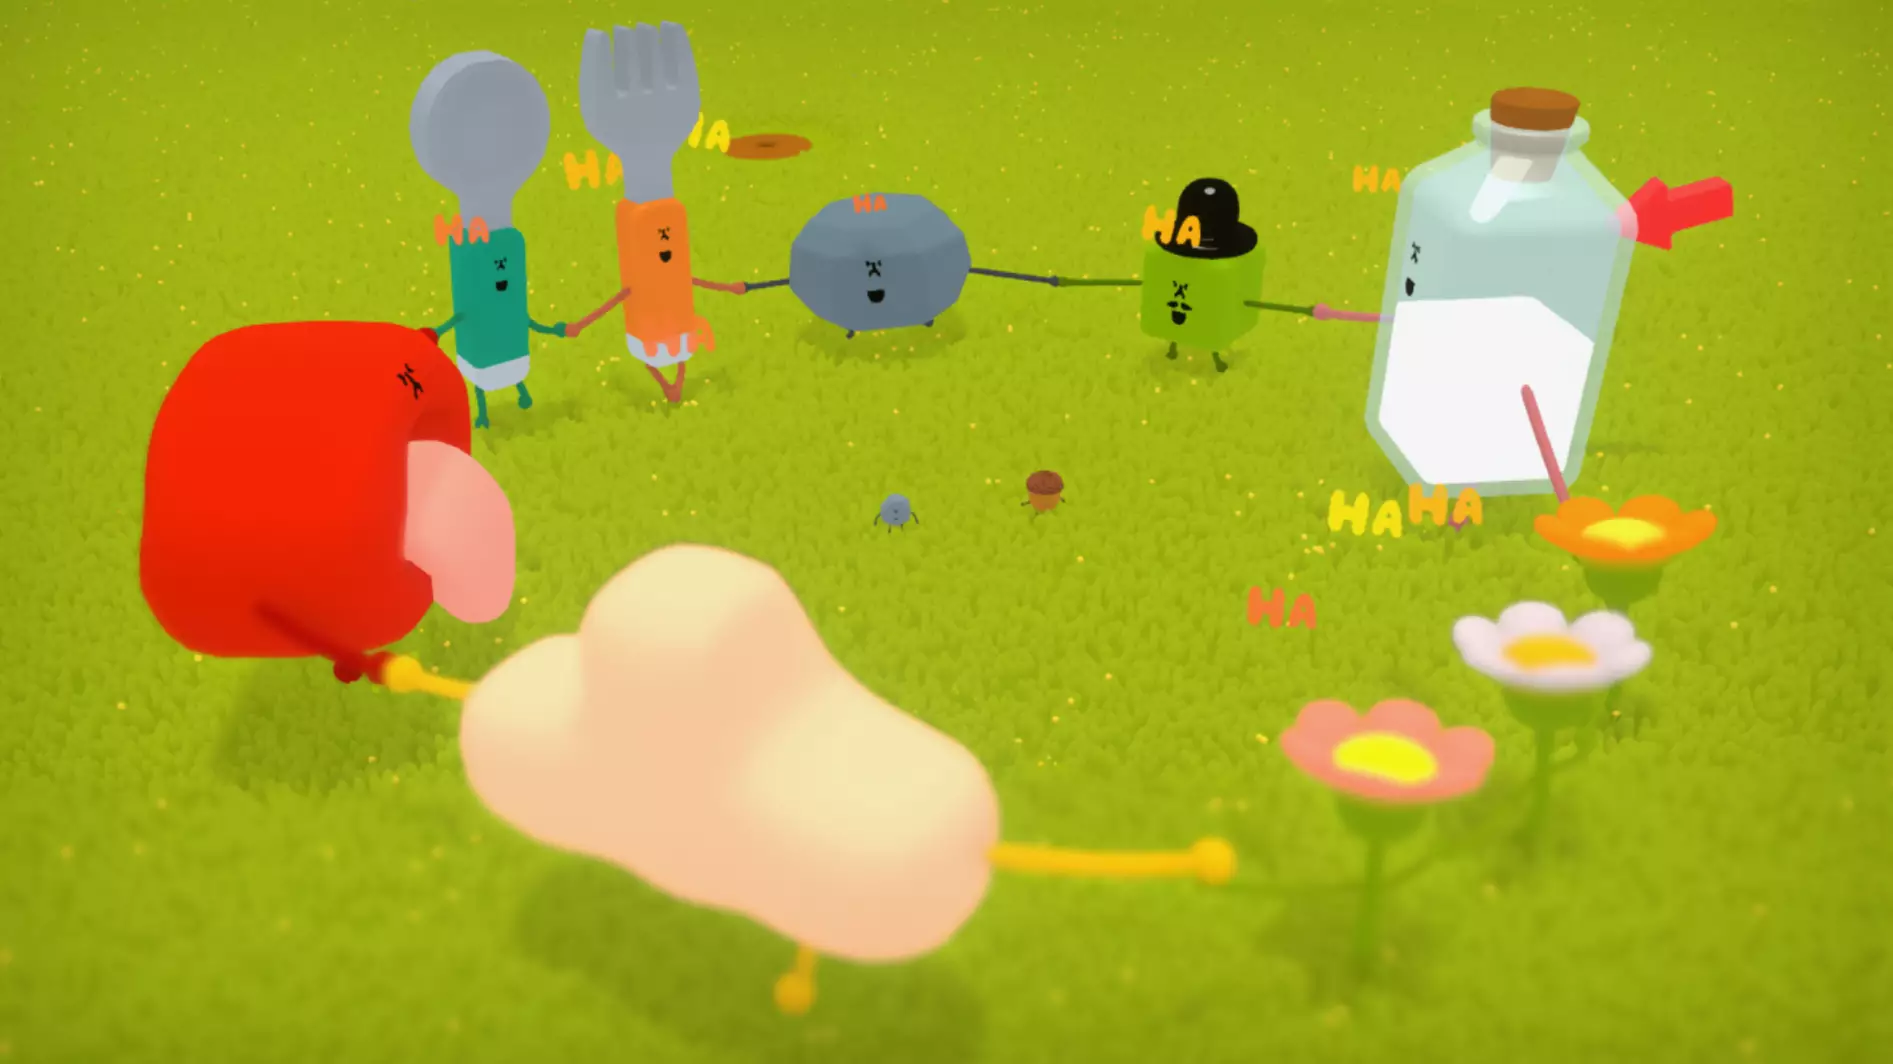 ‘Wattam’ Review: No Game Has Made Me Smile More In 2019 